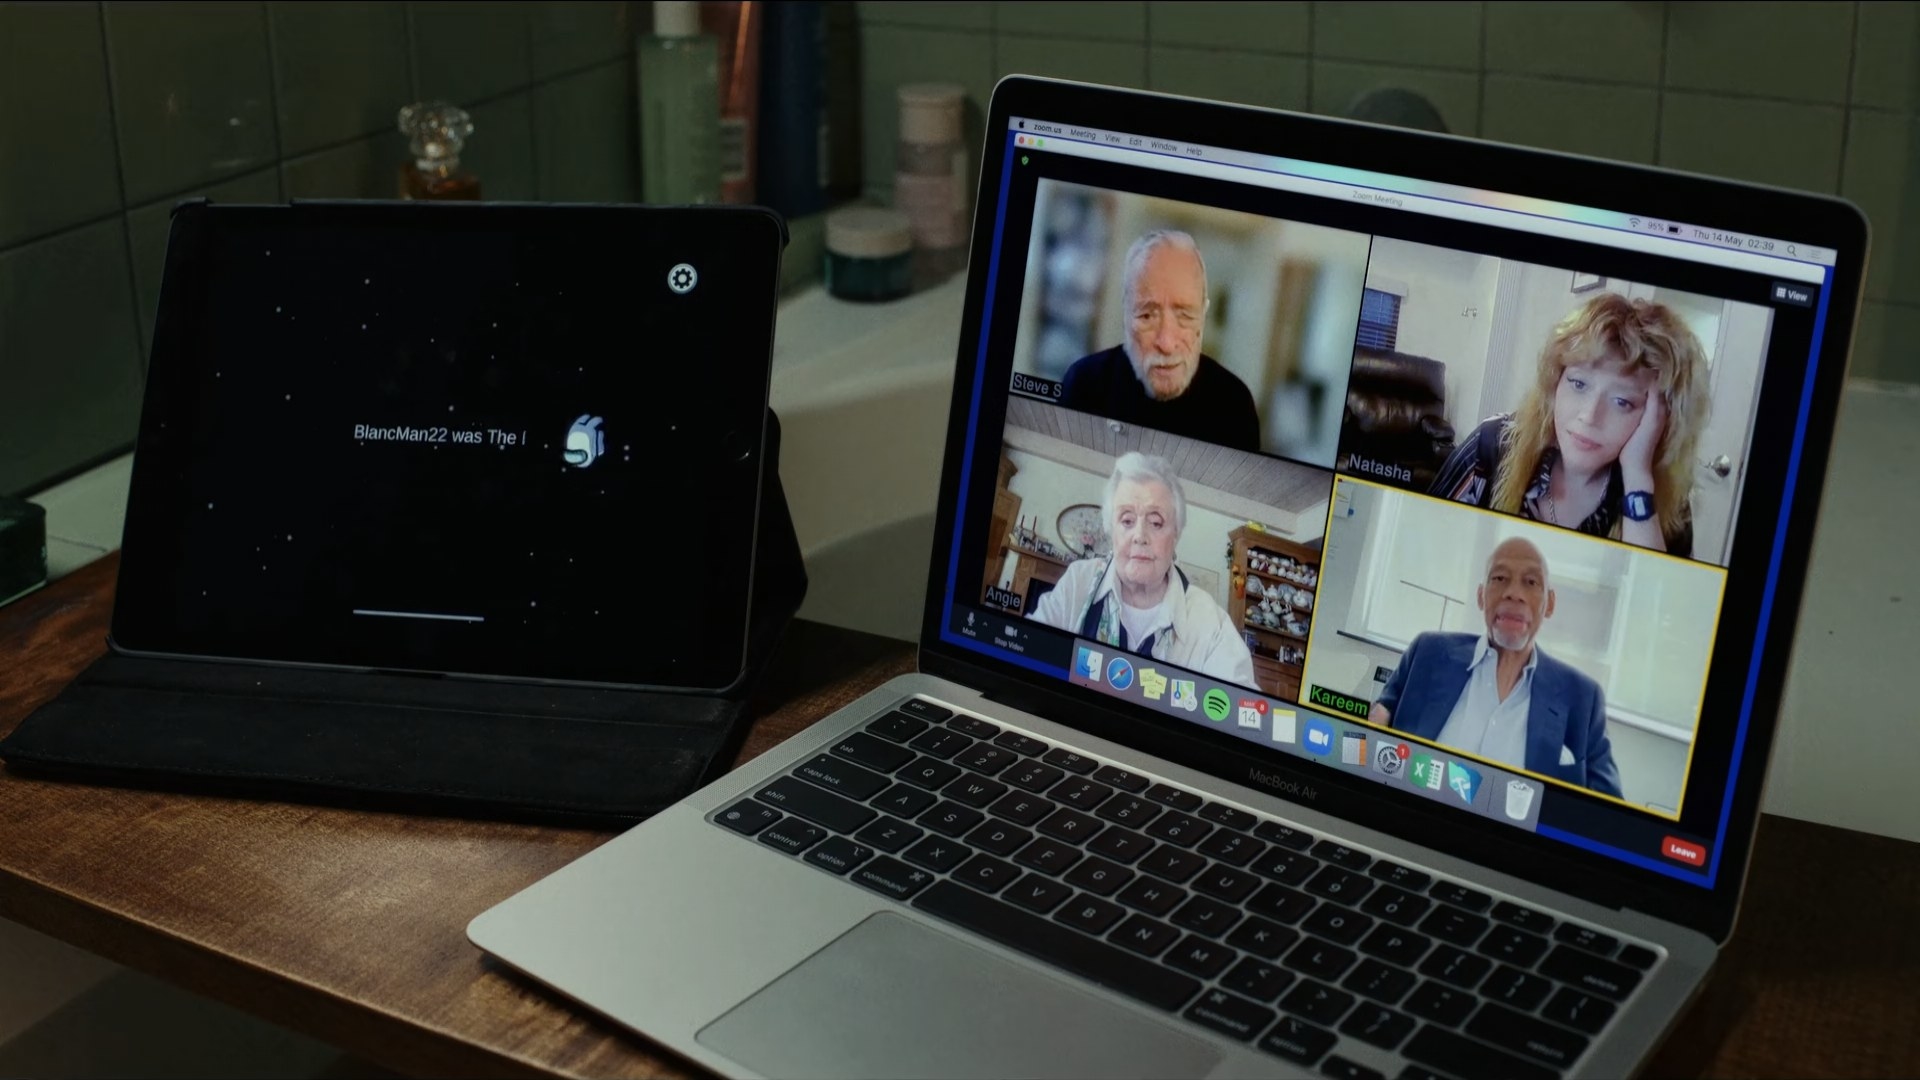 a laptop screen shows a video call in which the faces of four people appear on screen